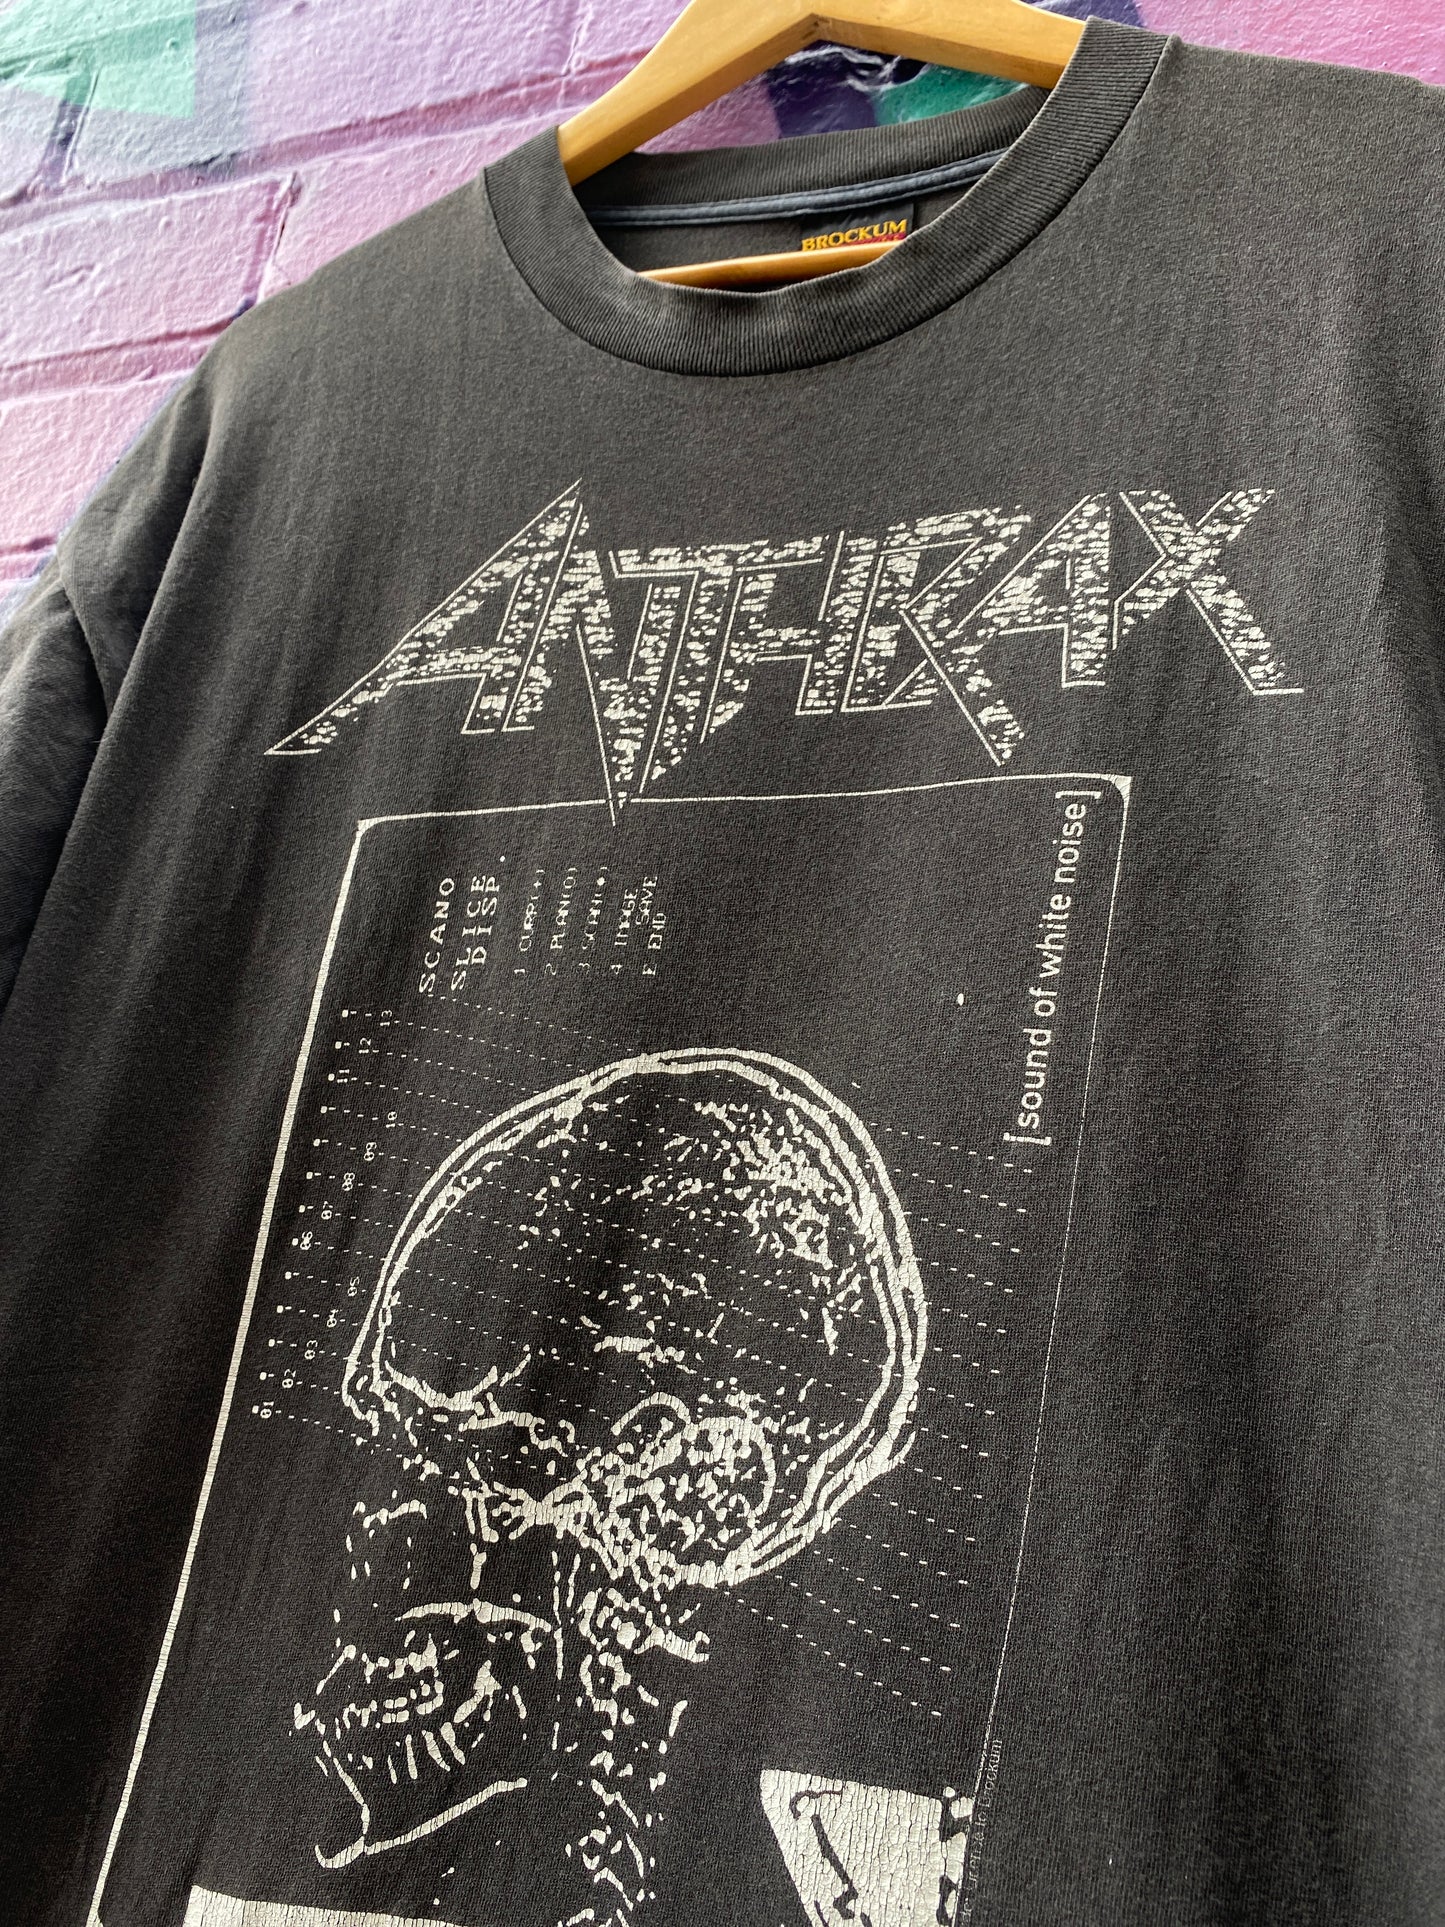 XL - 1993 Anthrax Sound Of White Noise DS